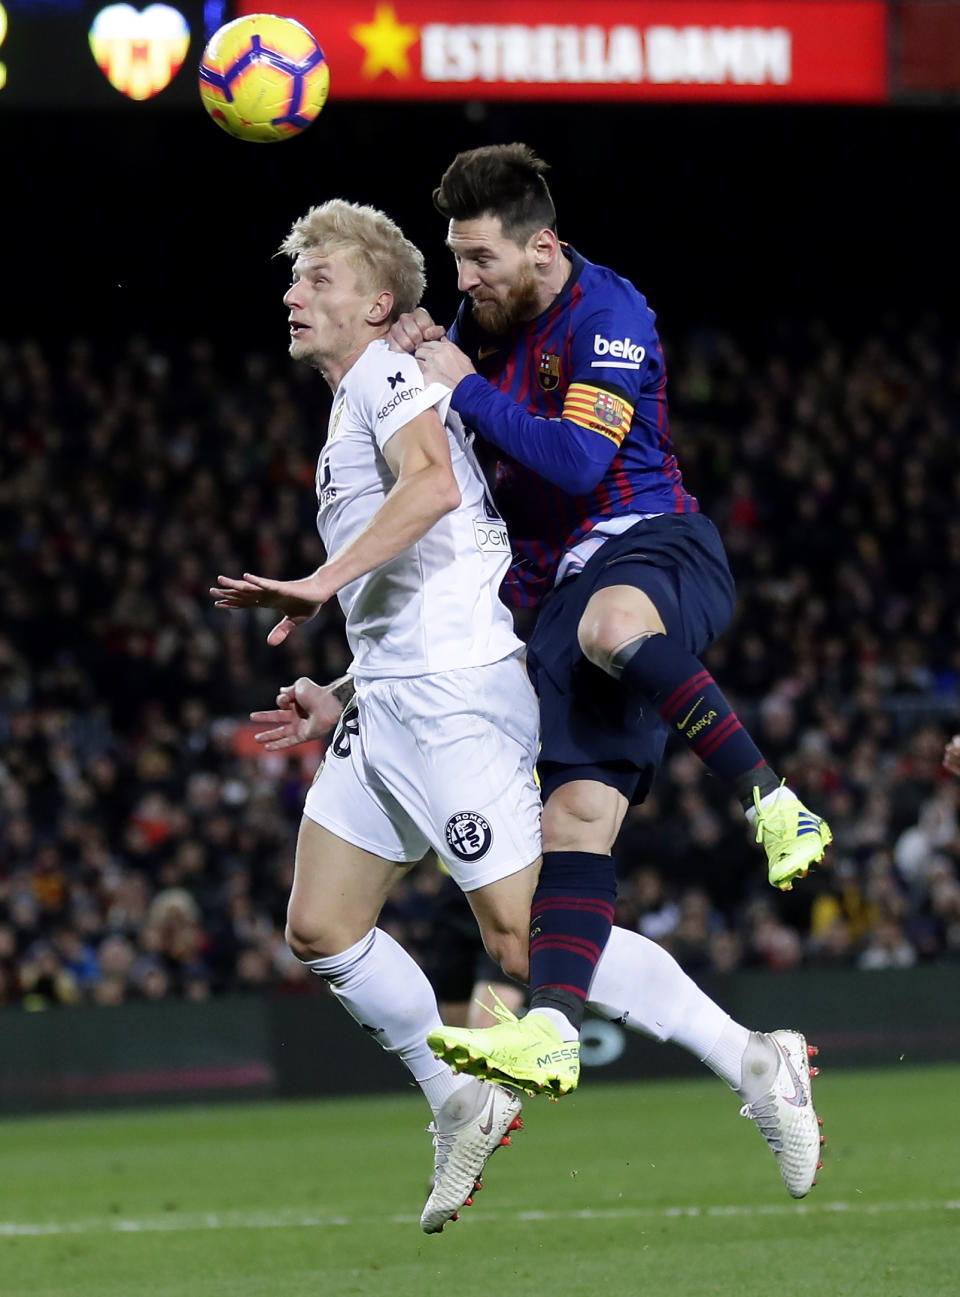 FC Barcelona's Lionel Messi, right, heads for the ball with Valencia's Carlos Soler during the Spanish La Liga soccer match between FC Barcelona and Valencia at the Camp Nou stadium in Barcelona, Spain, Saturday, Feb. 2, 2019. (AP Photo/Manu Fernandez)